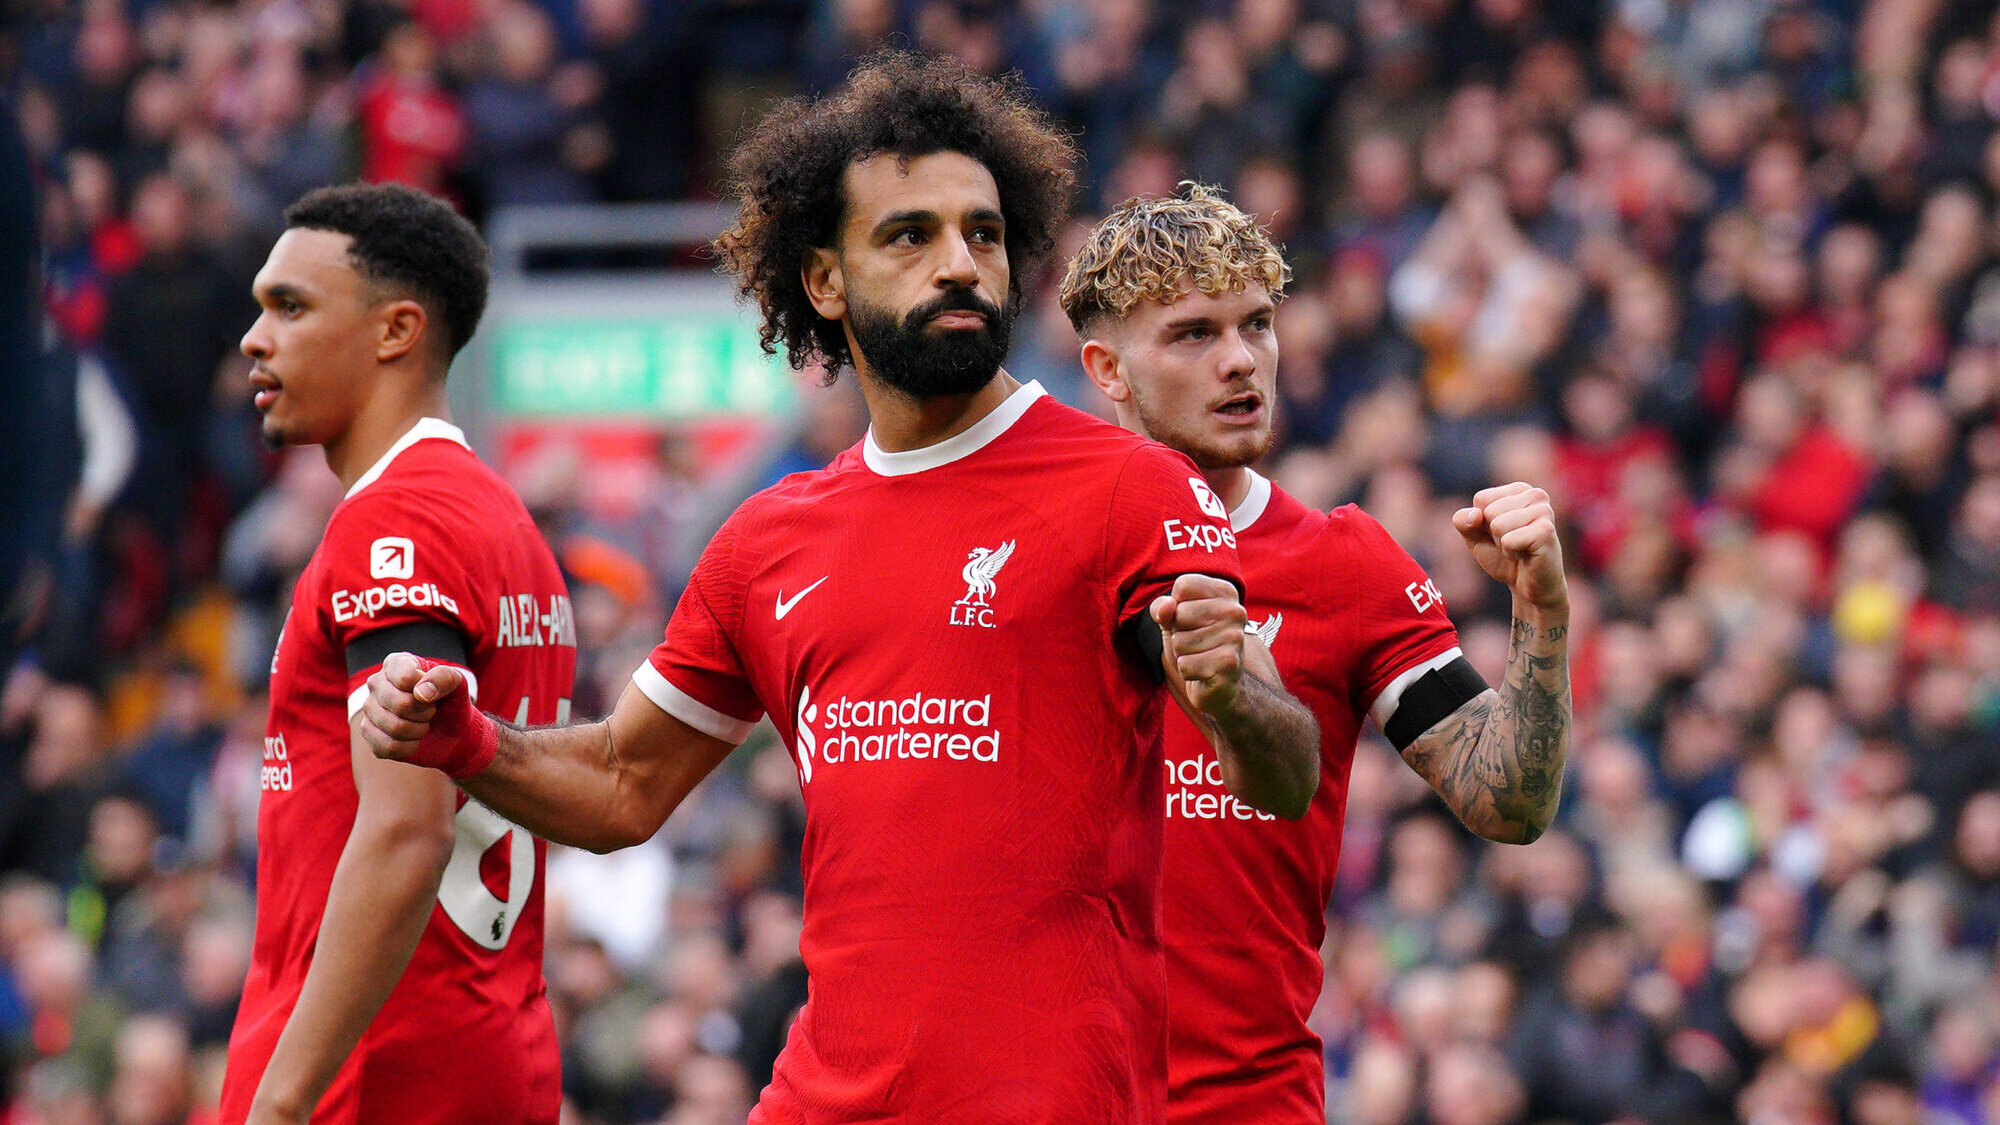 Liverpool legend names the one player whose departure would be a 'bigger blow' than Salah - Achievements and contributions to Liverpool FC